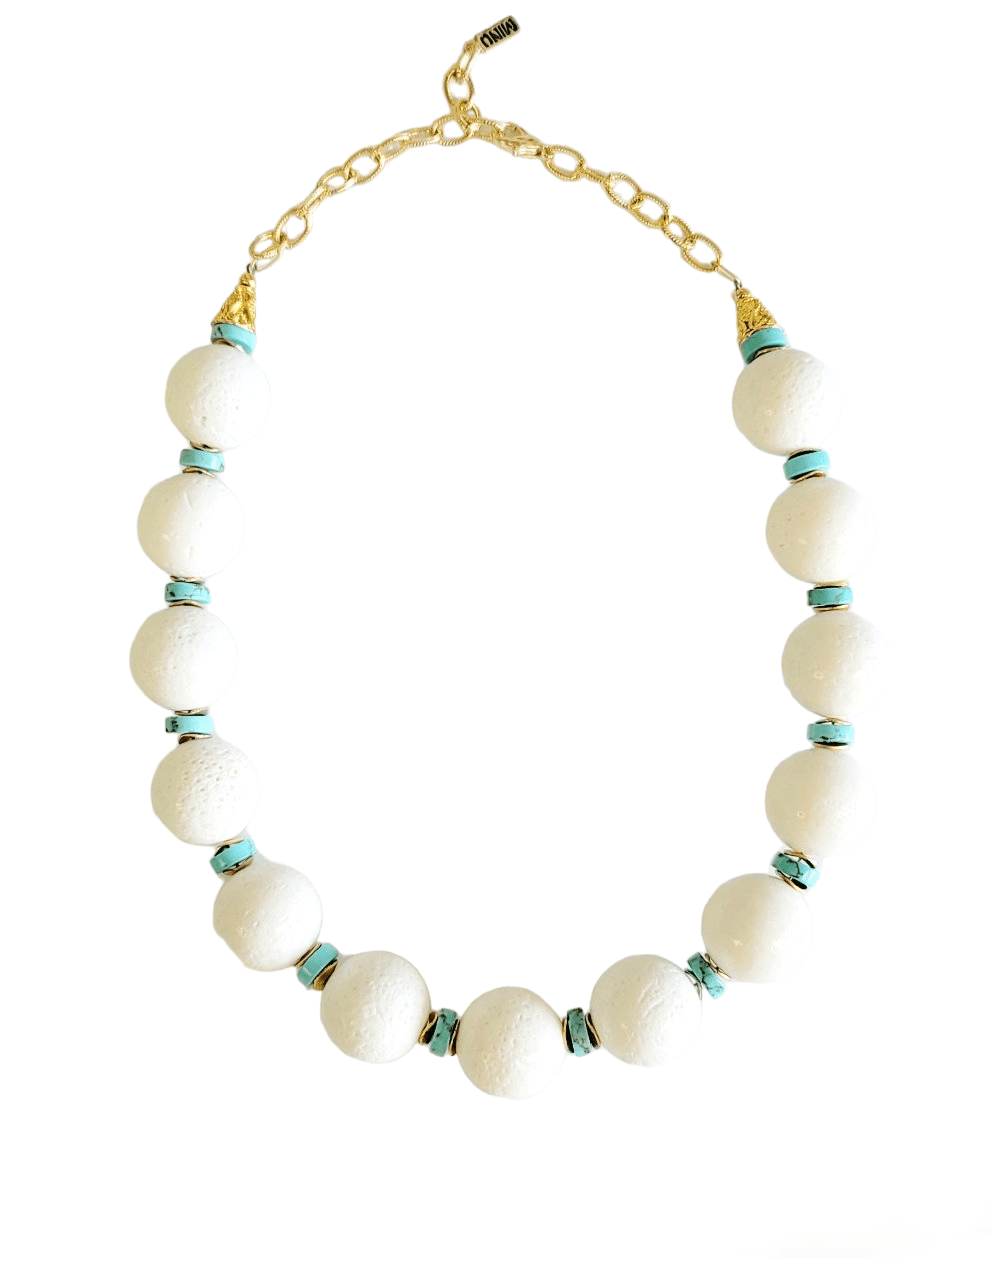 MINU Jewels Necklaces Capri 17-18" Necklace in Large Agate Stones with Gold Plated & Turquoise Accents